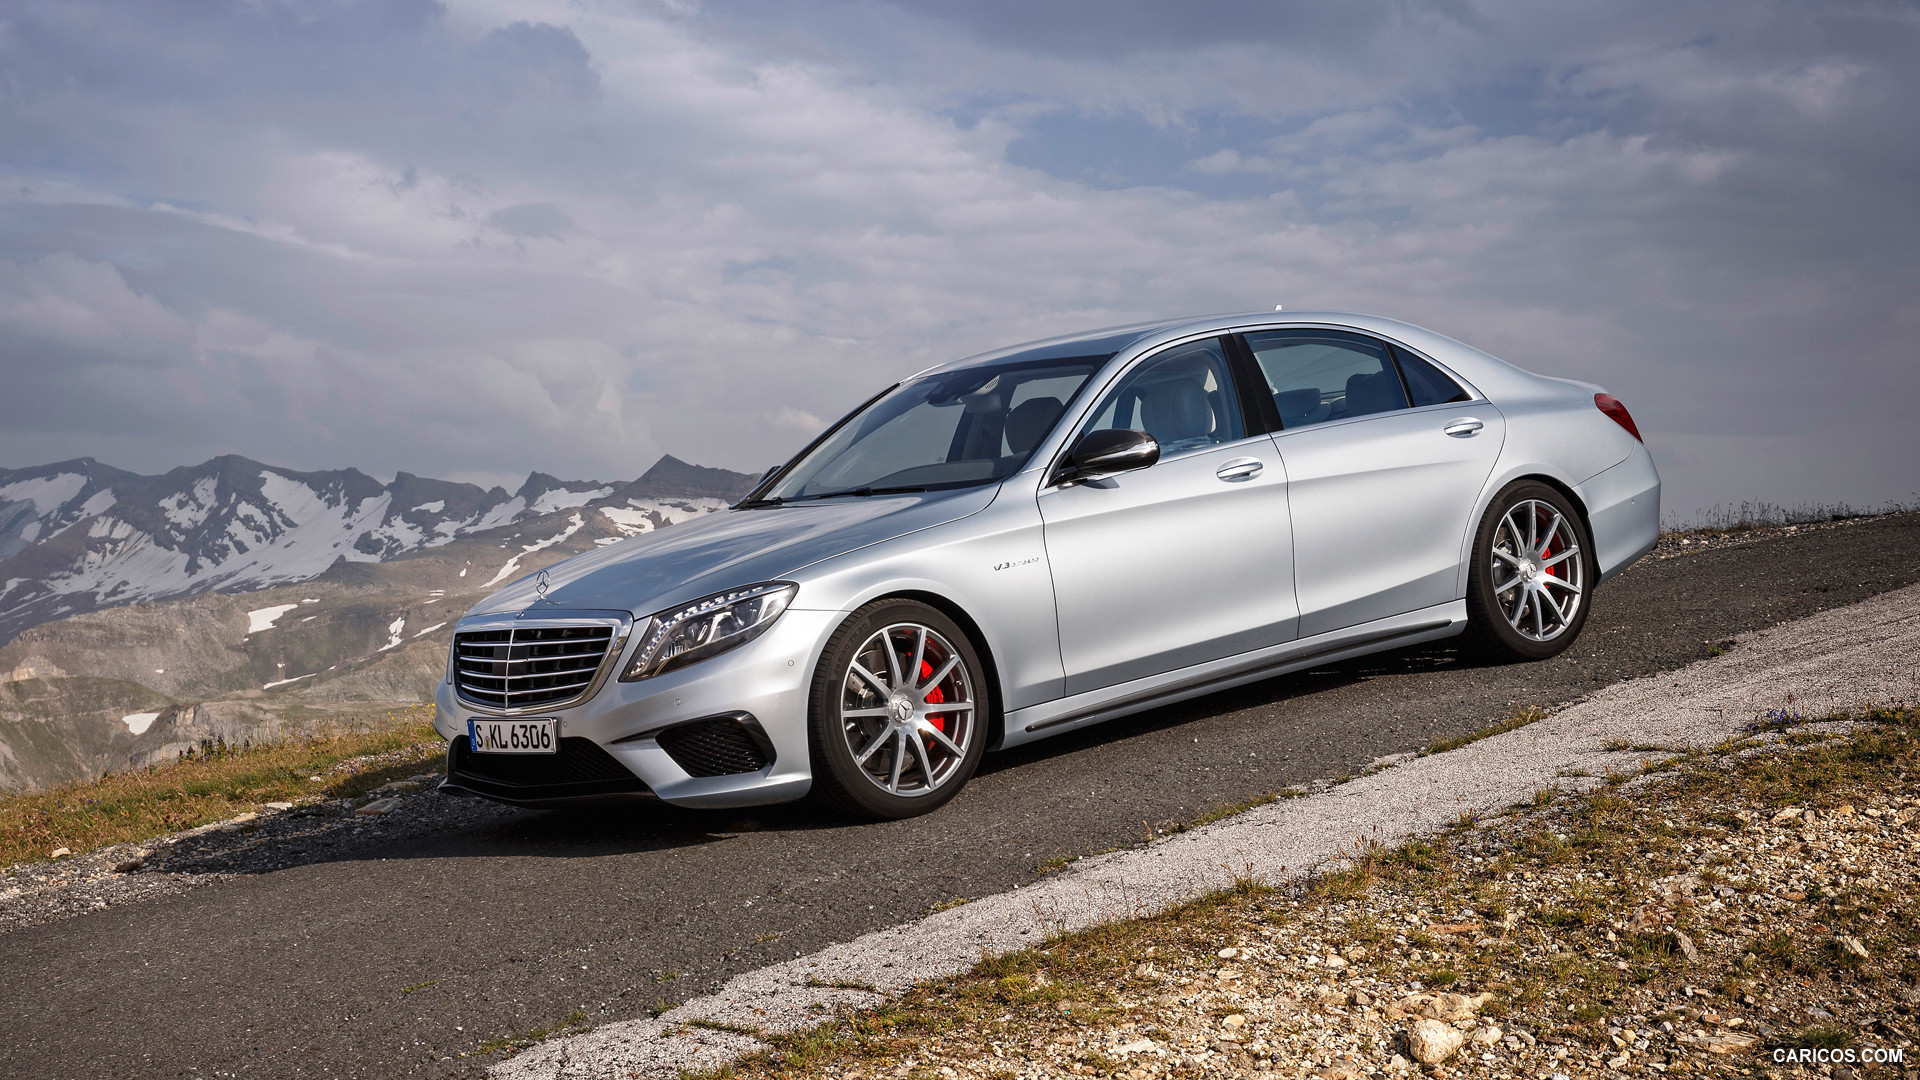 Mercedes-Benz S63 AMG W222 (2014)  - Front, #23 of 102